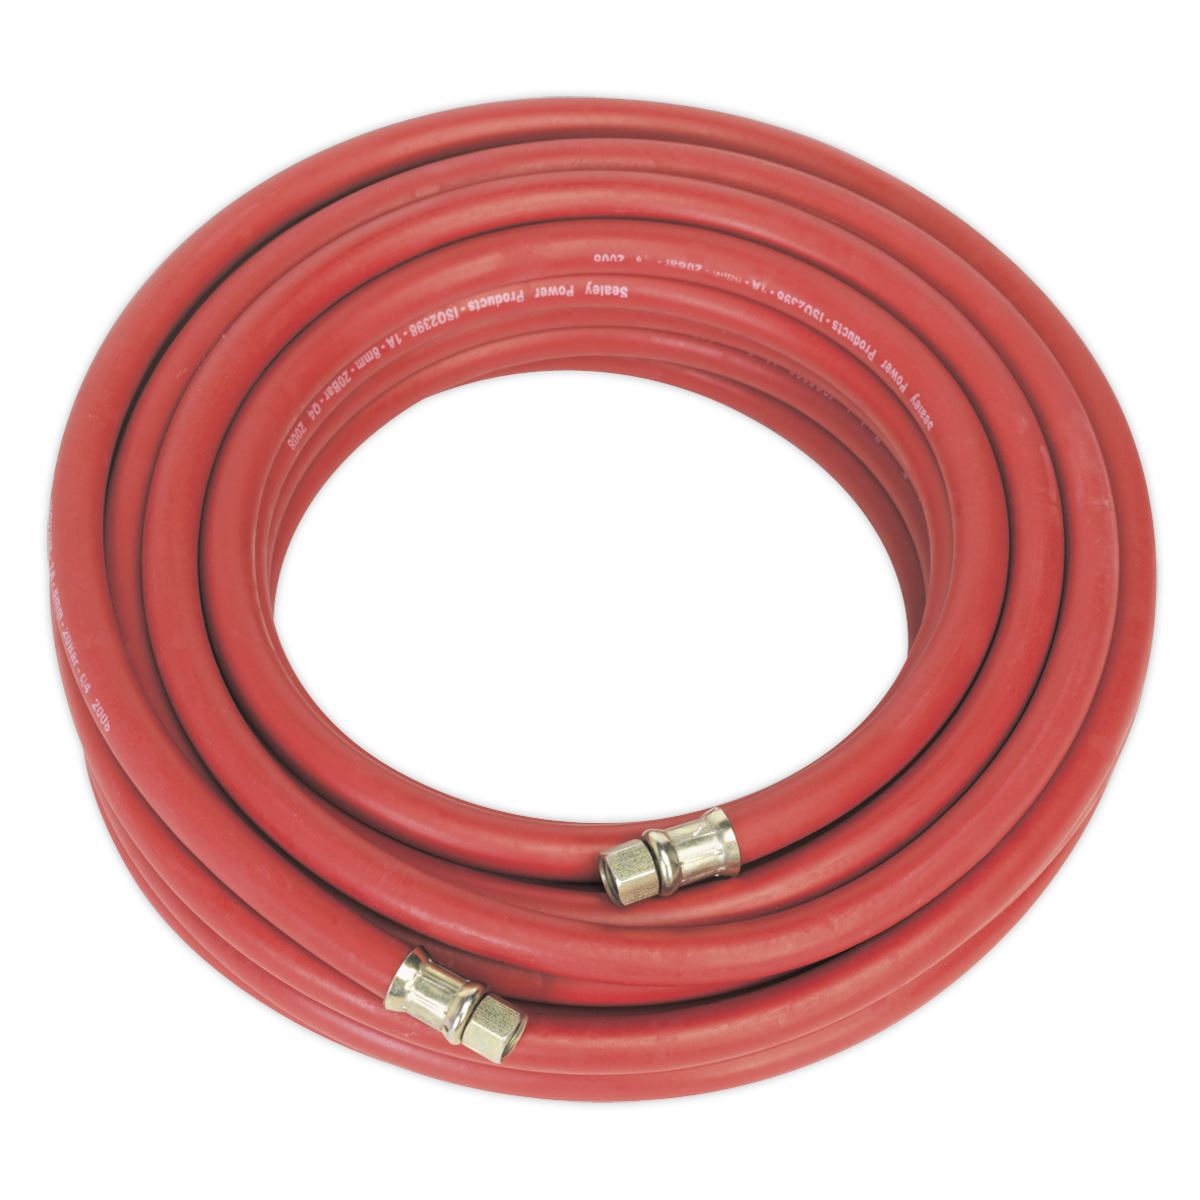 Sealey Air Hose 15m x Ø8mm with 1/4"BSP Unions